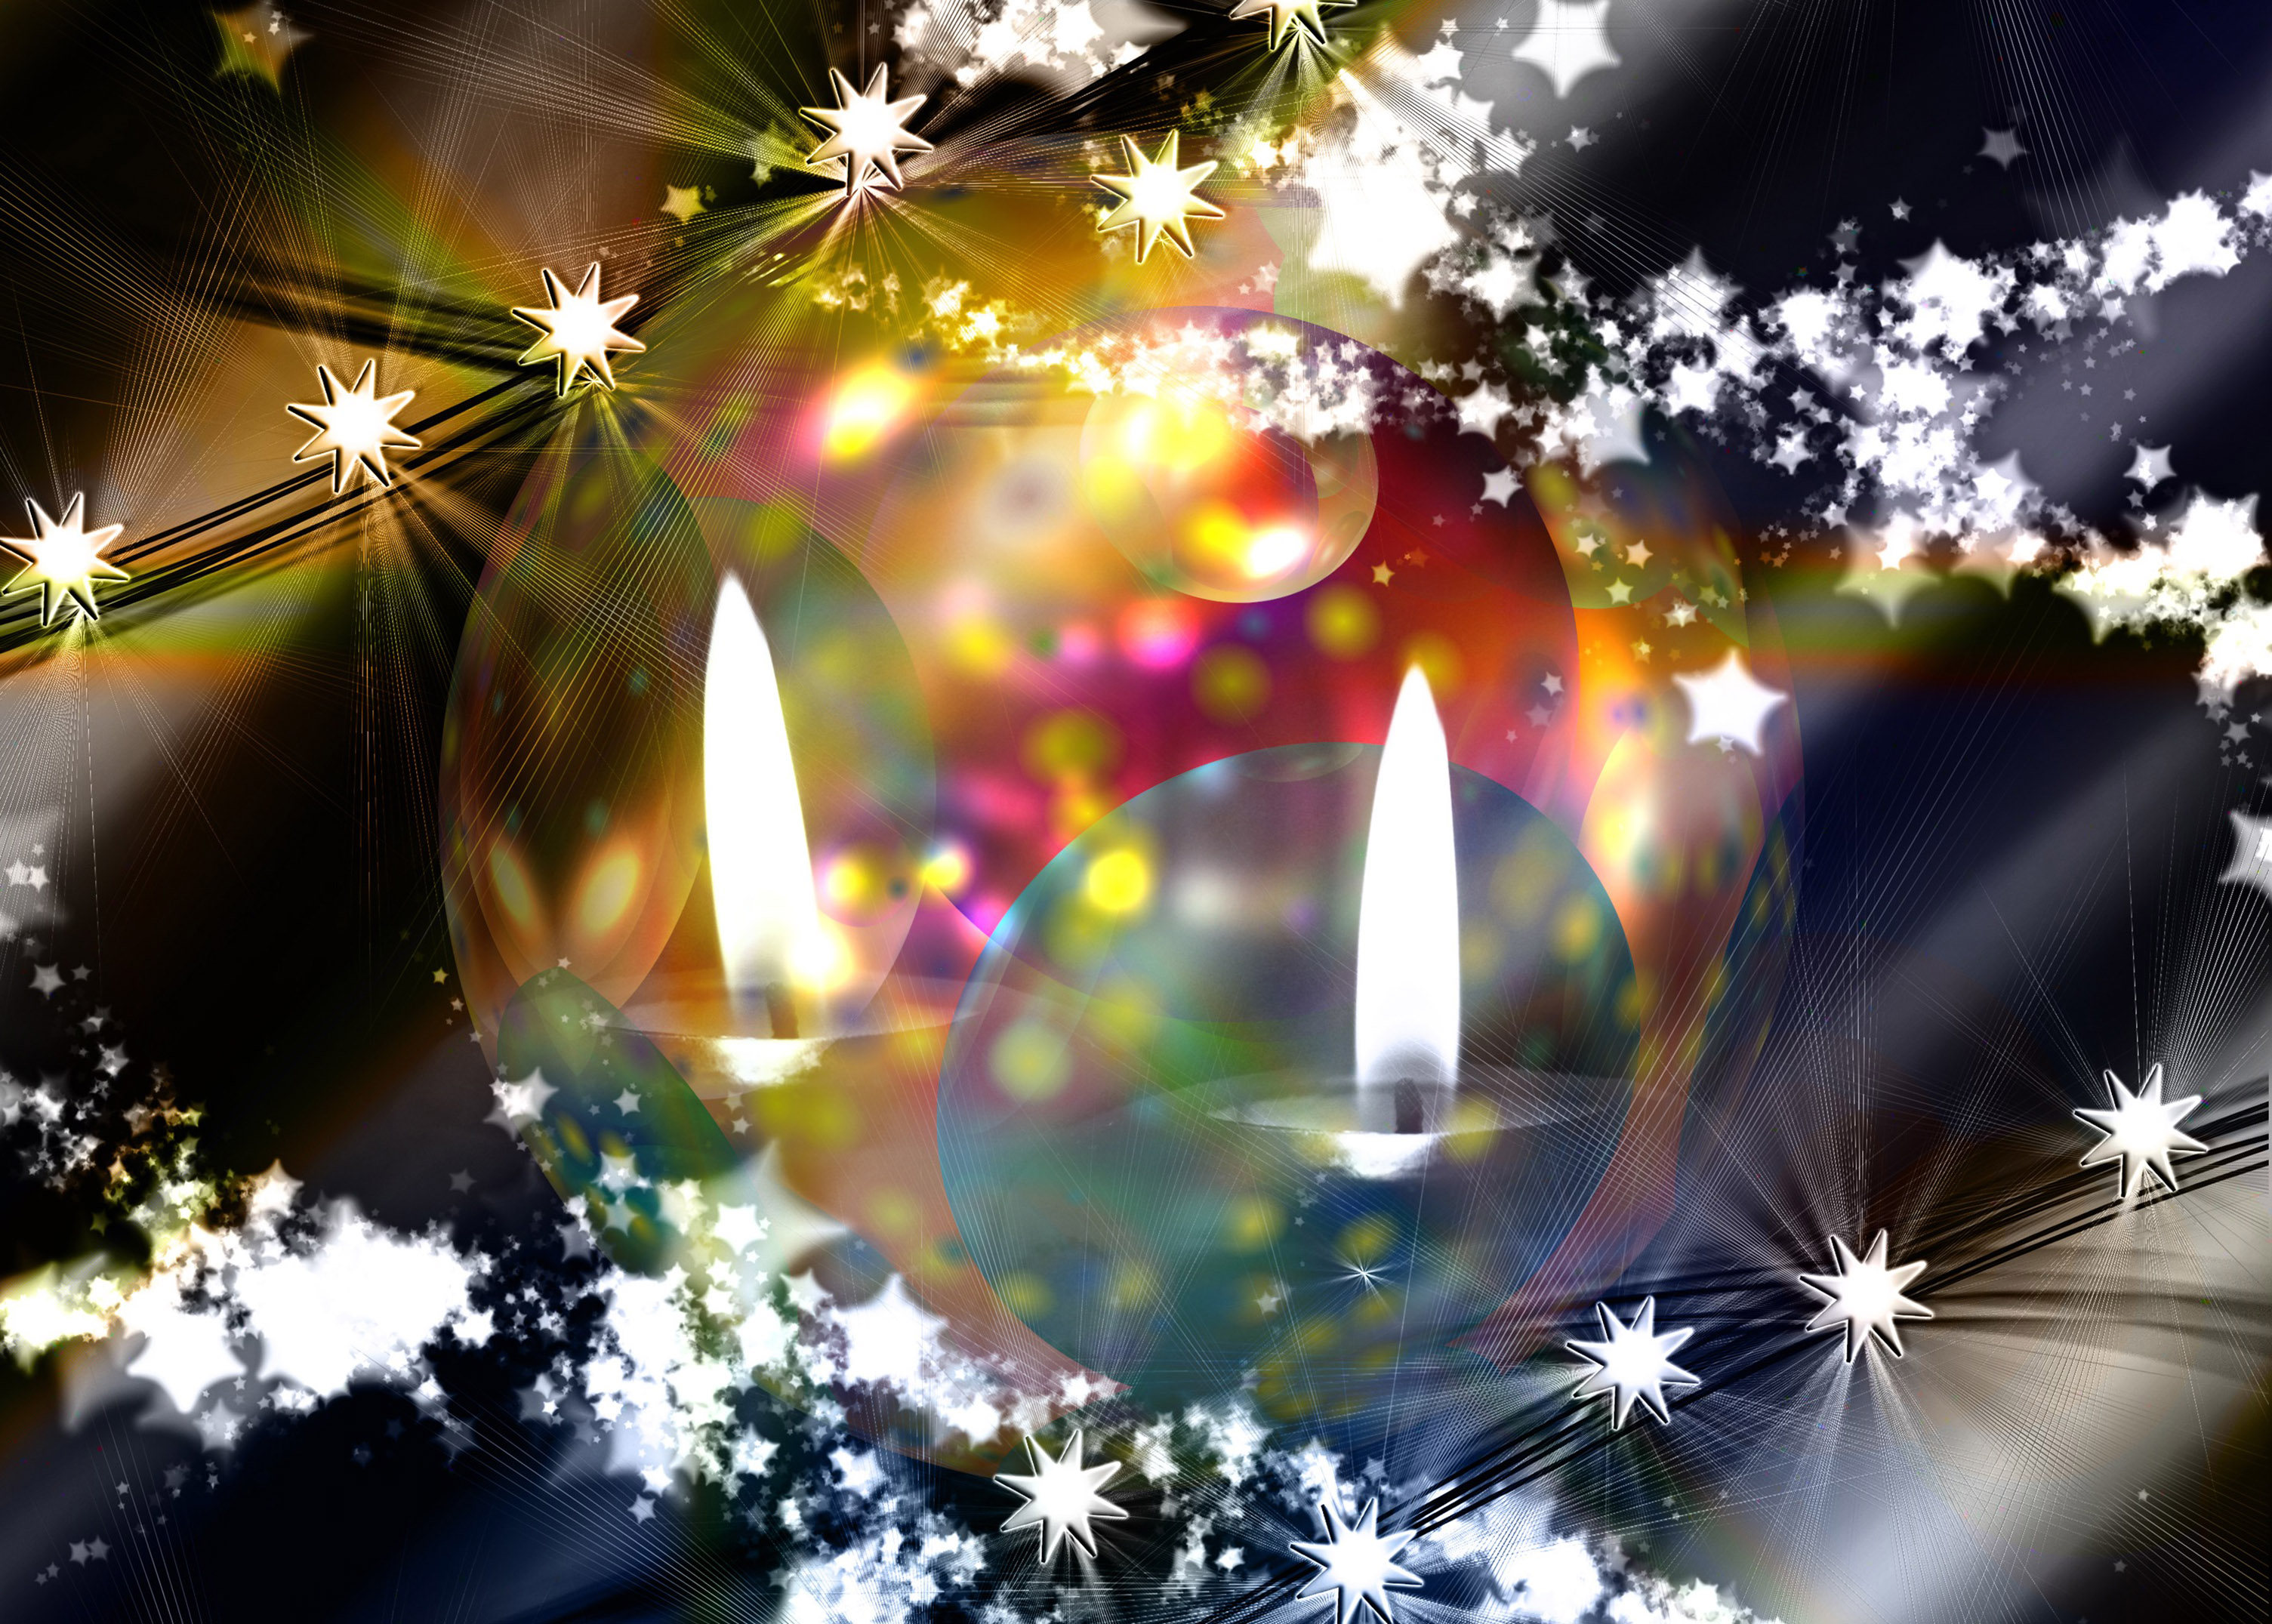 Great Candle Themed Christmas Wallpaper Or Xmas Background